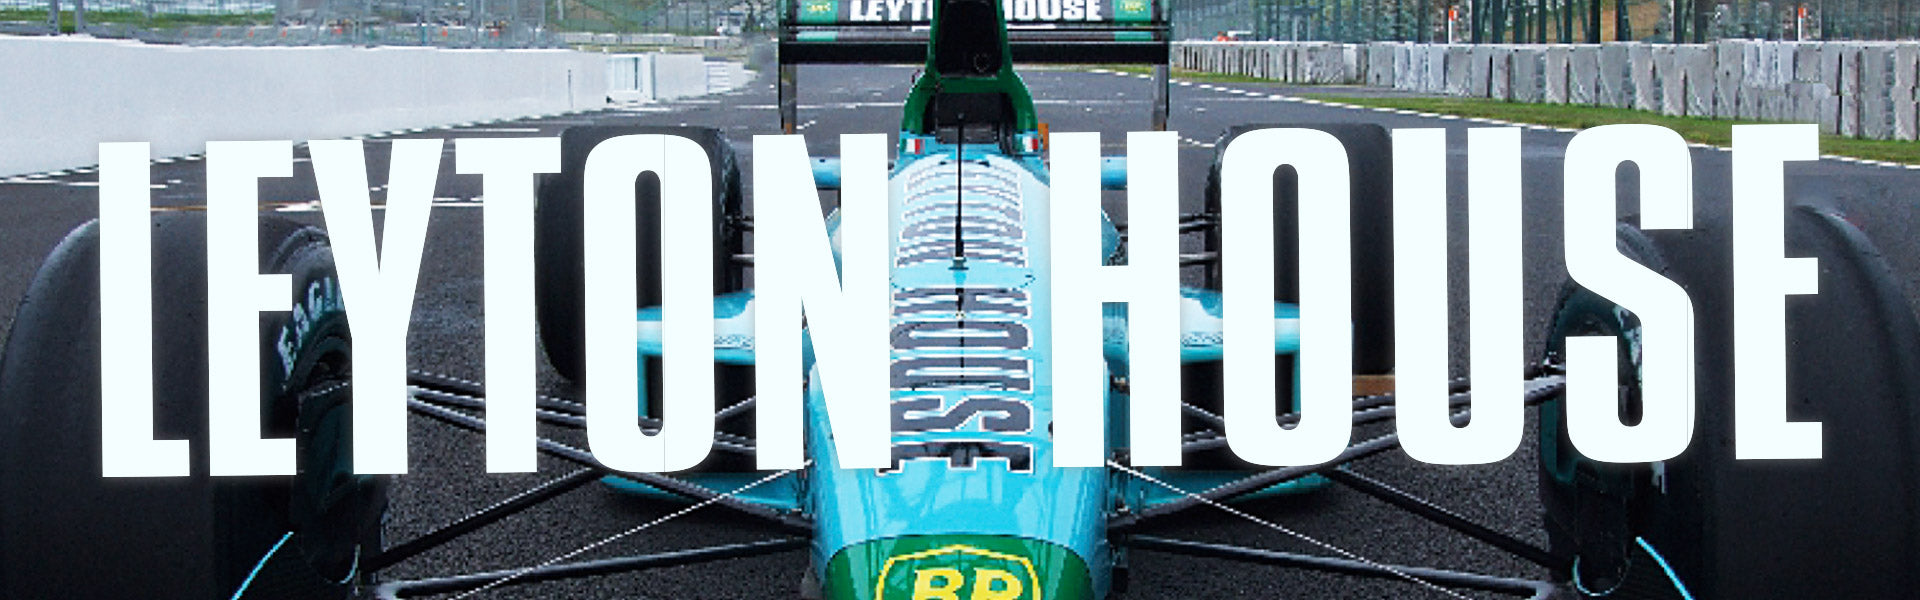 ☆ LEYTON HOUSE レイトンハウス 受付ボード ♪ - スポーツ別